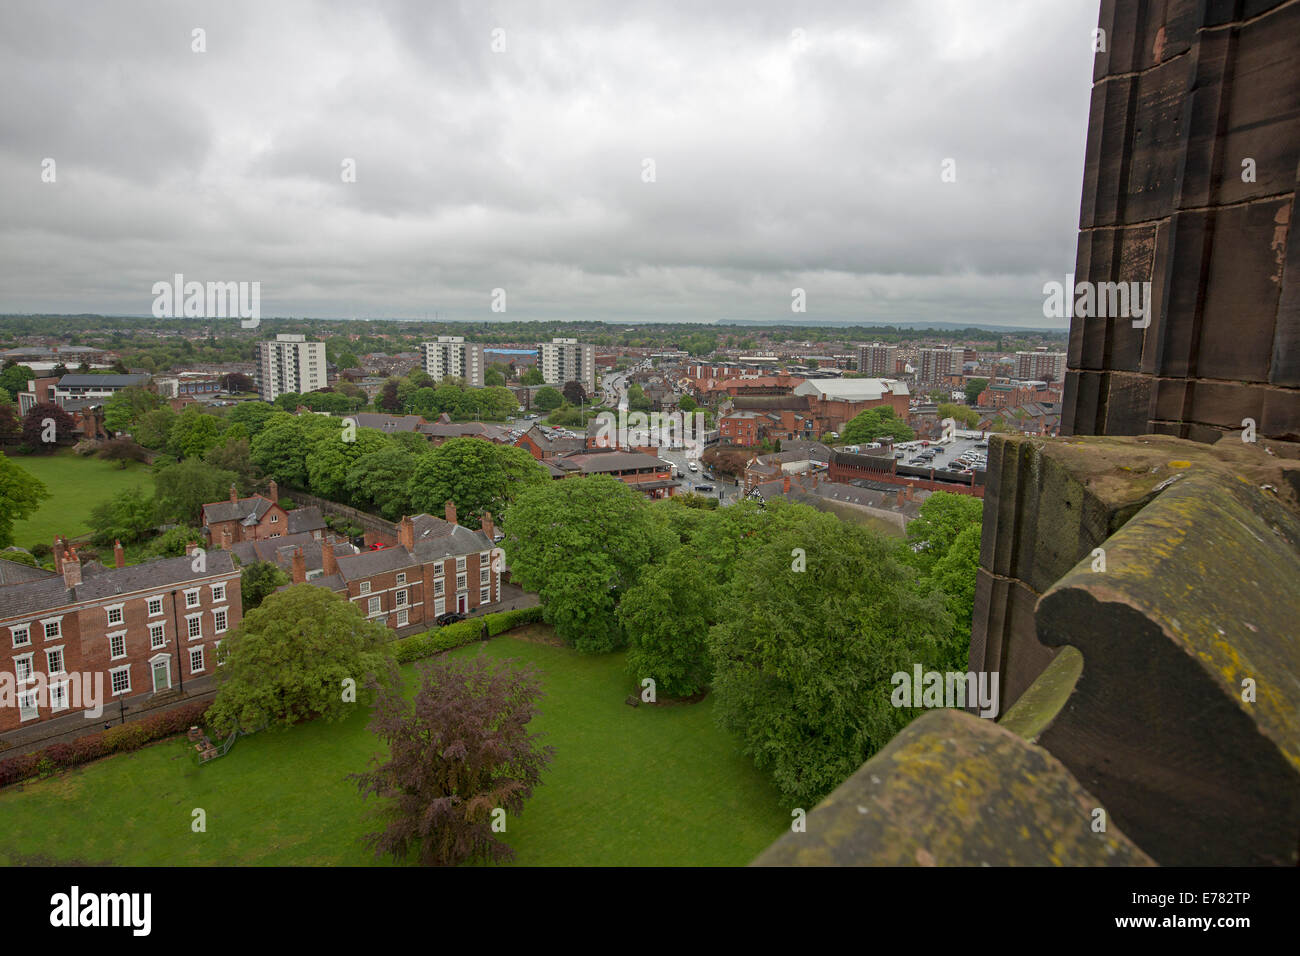 View of vast urban landscape dominated by high rise buildings from roof of historic cathedral in English city of Chester Stock Photo